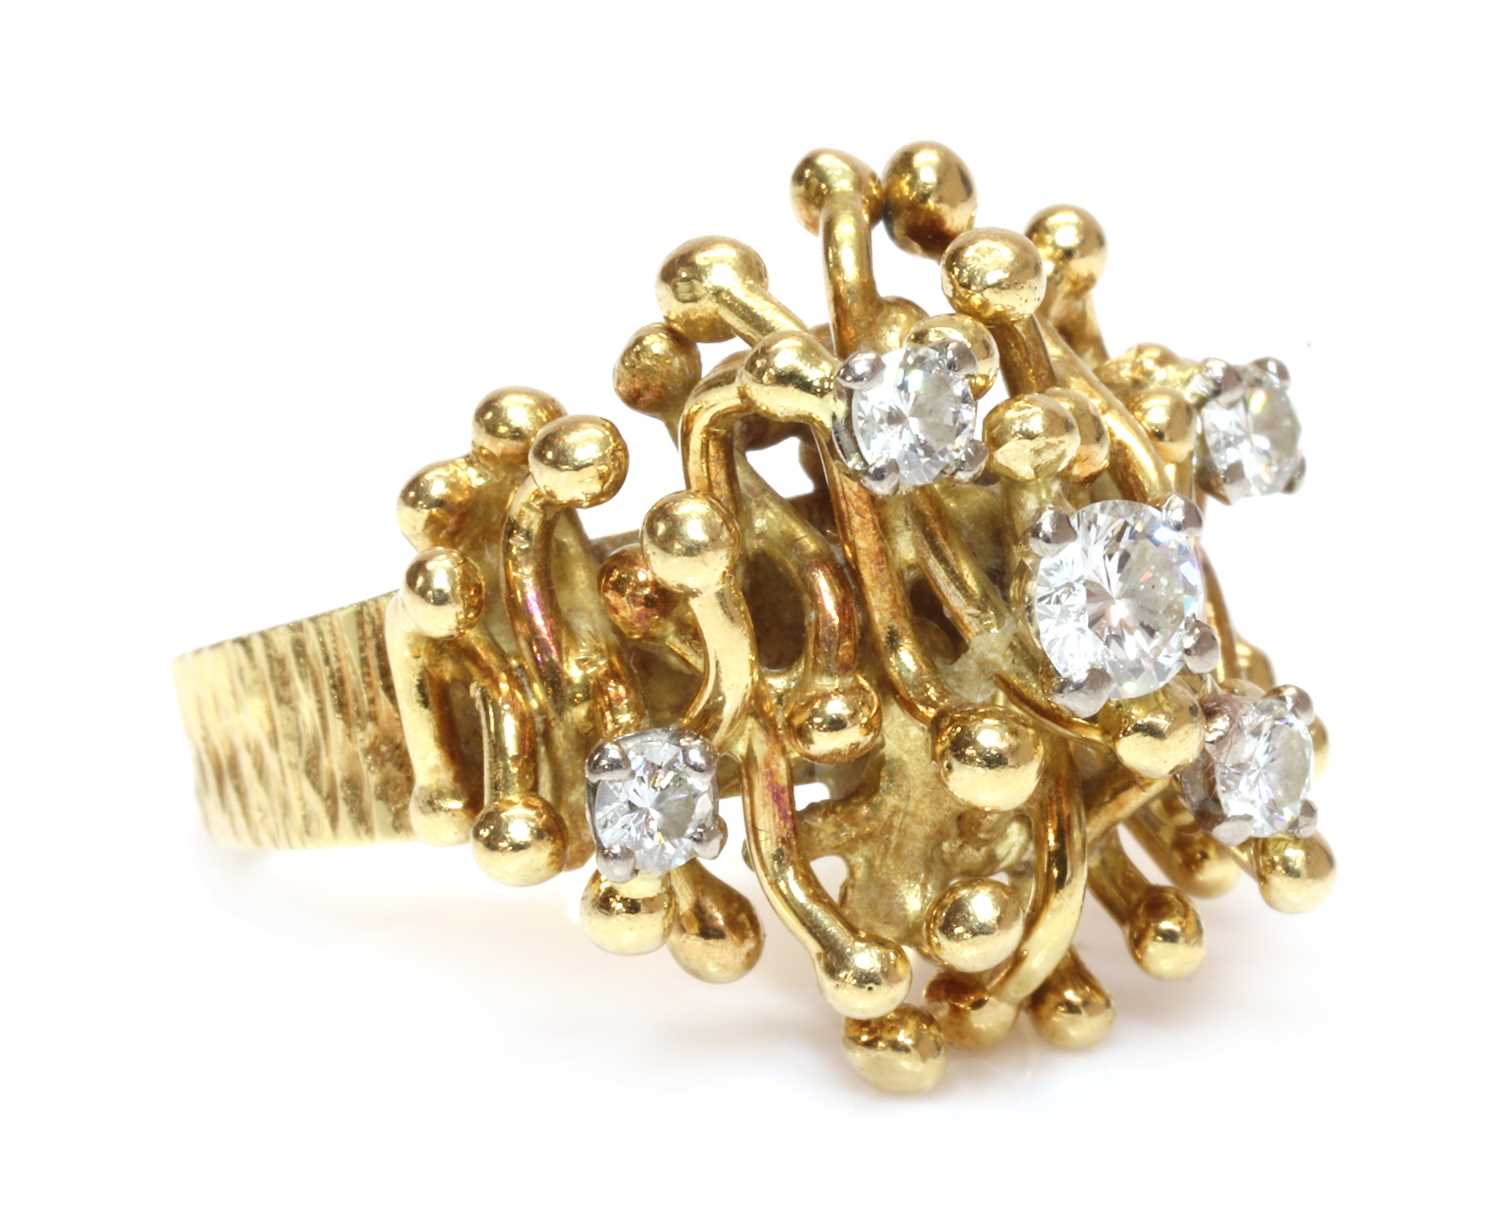 Lot 288 - An 18ct gold diamond set twig ring, by D. A. Soley, c.1970